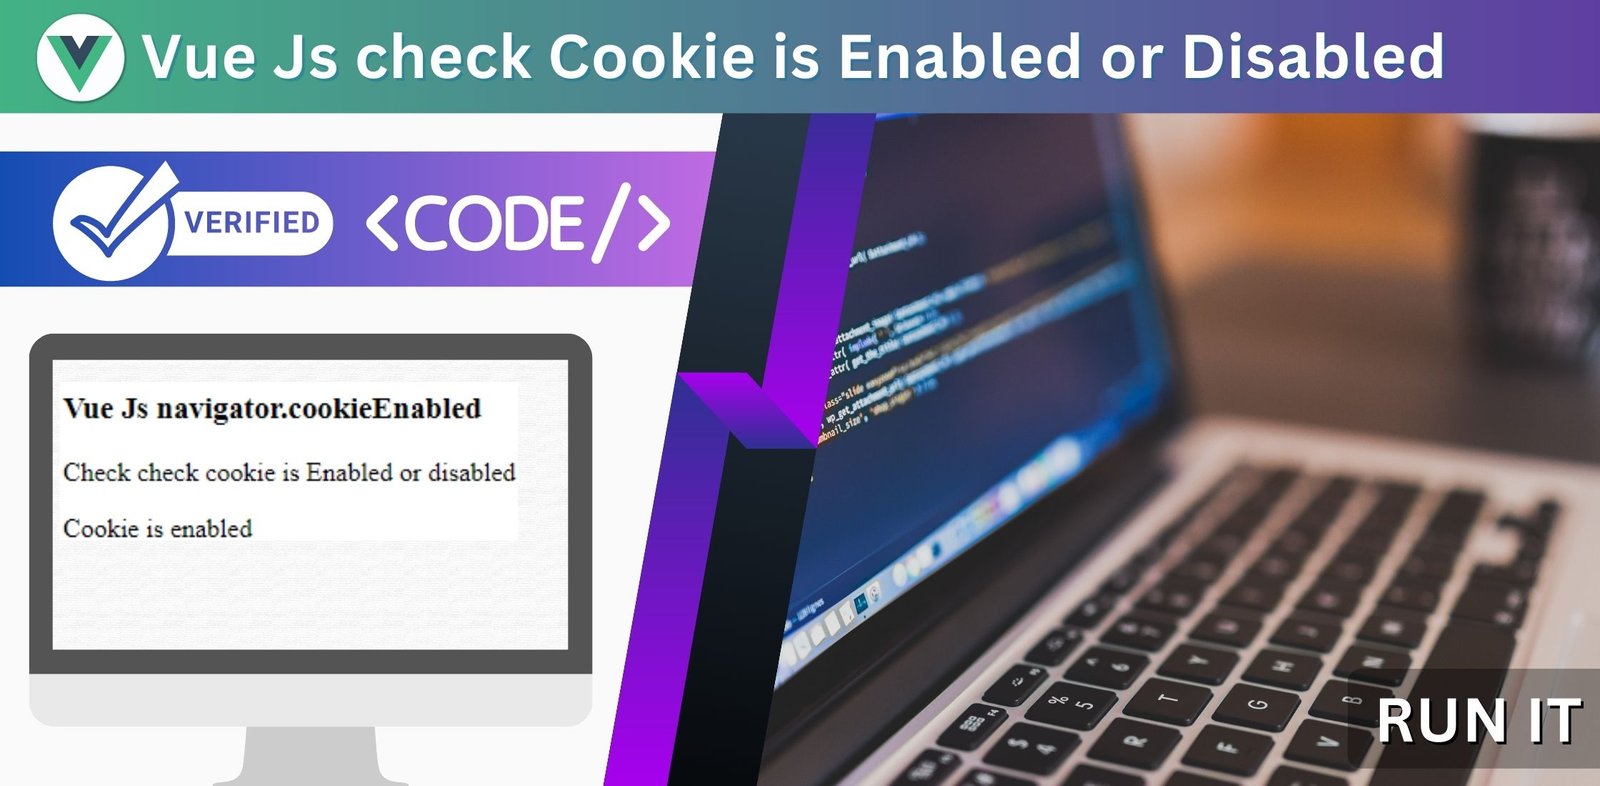 Vue Js check Cookie is Enabled or Disabled